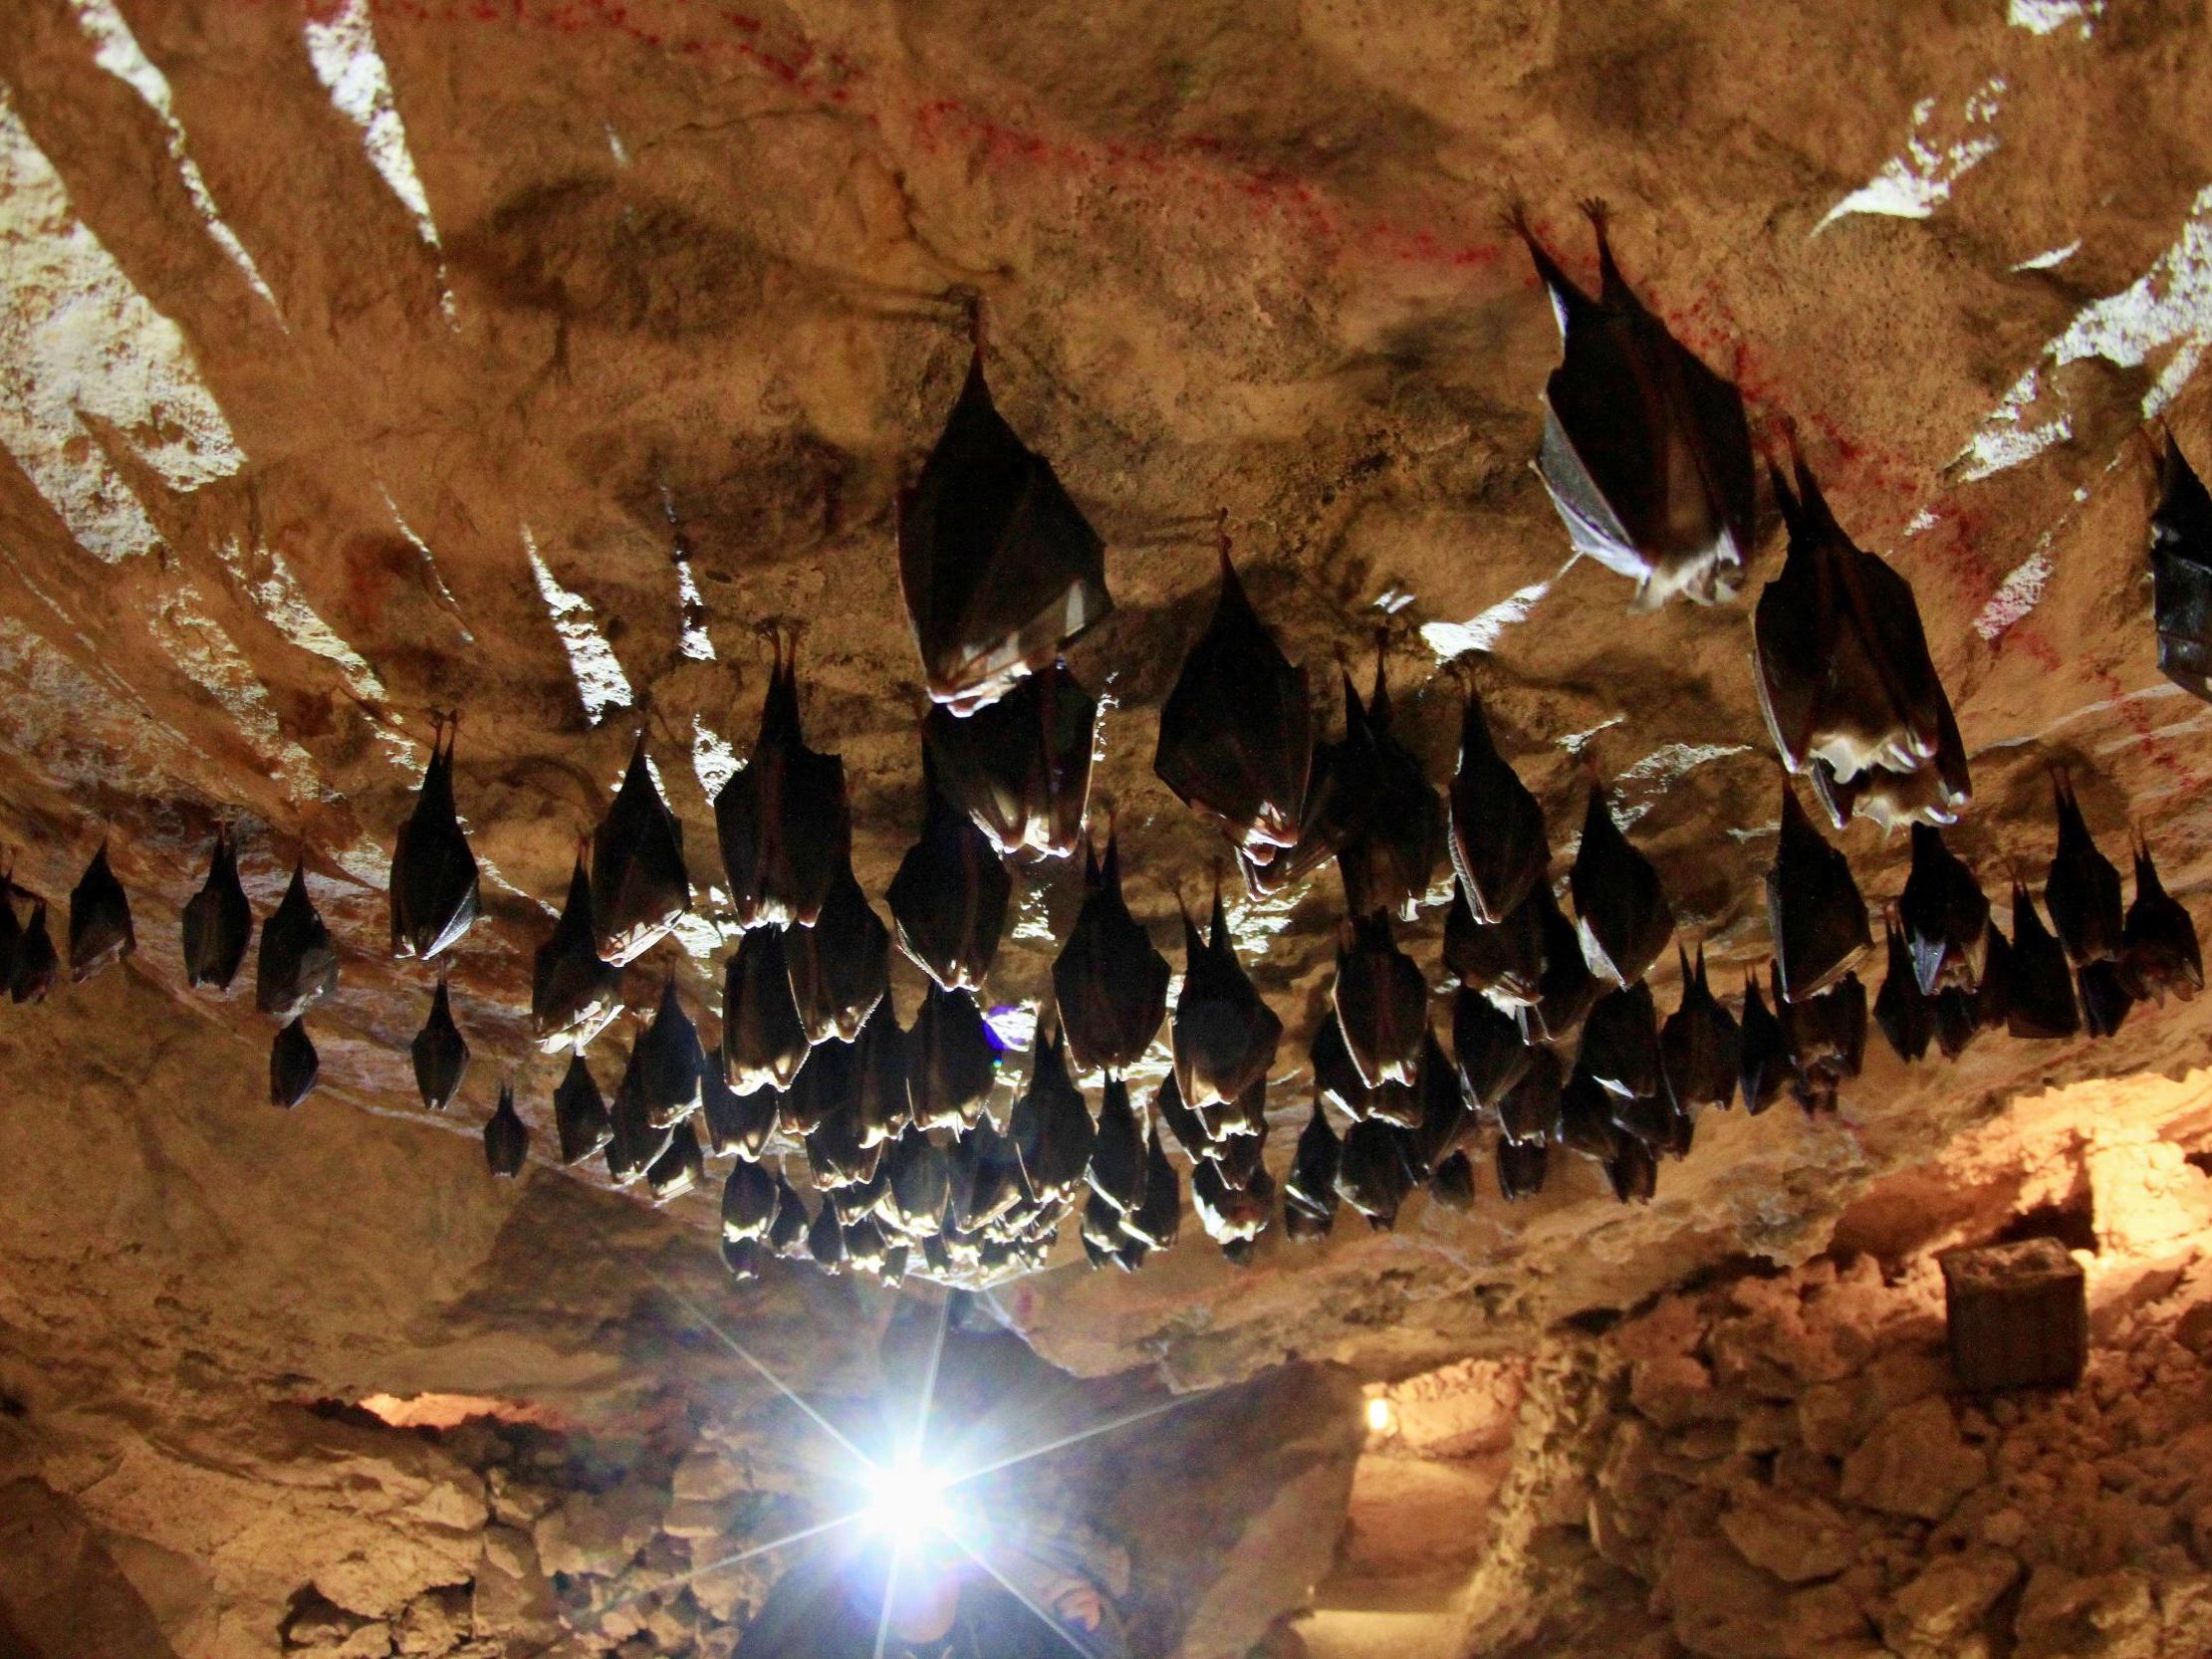 Bats may have hosted the virus, but it's believed that human interference made it spread